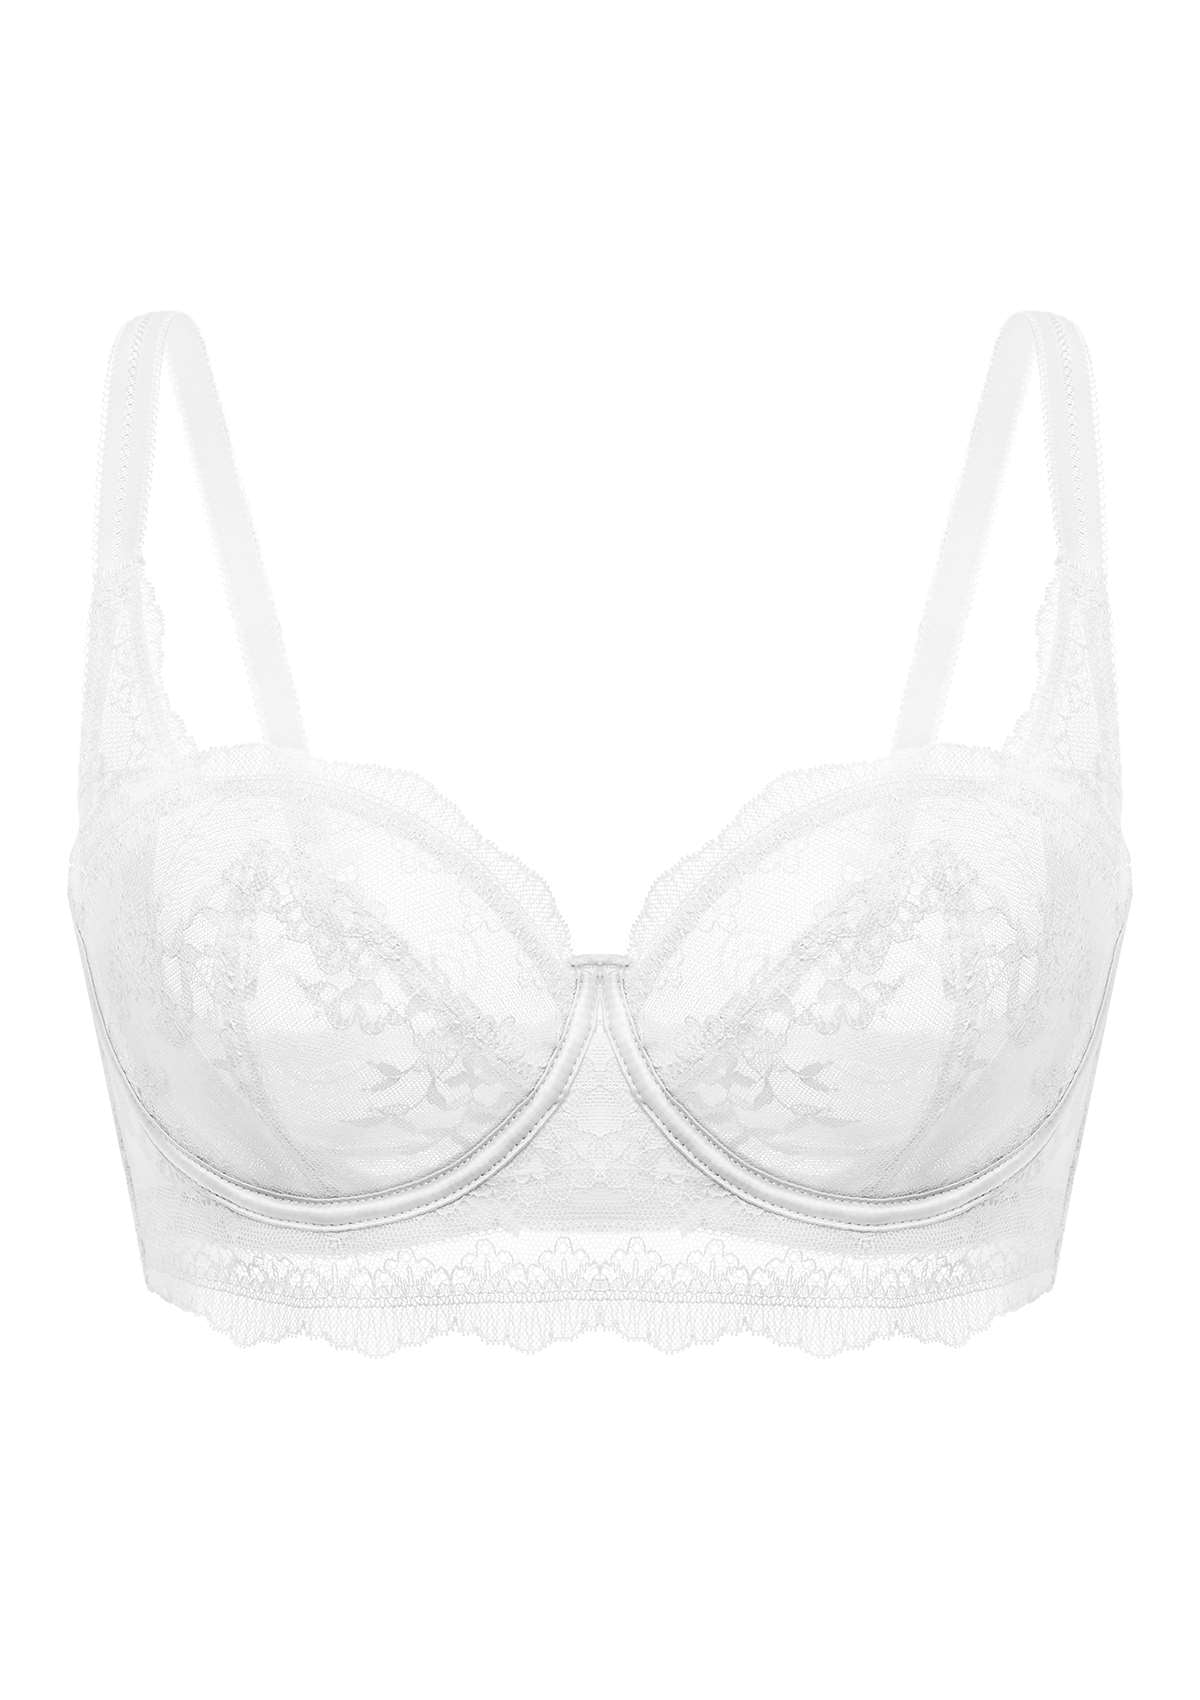 HSIA I Do Floral Lace Bridal Balconette Beautiful Bra For Special Day - Pink / 38 / DD/E